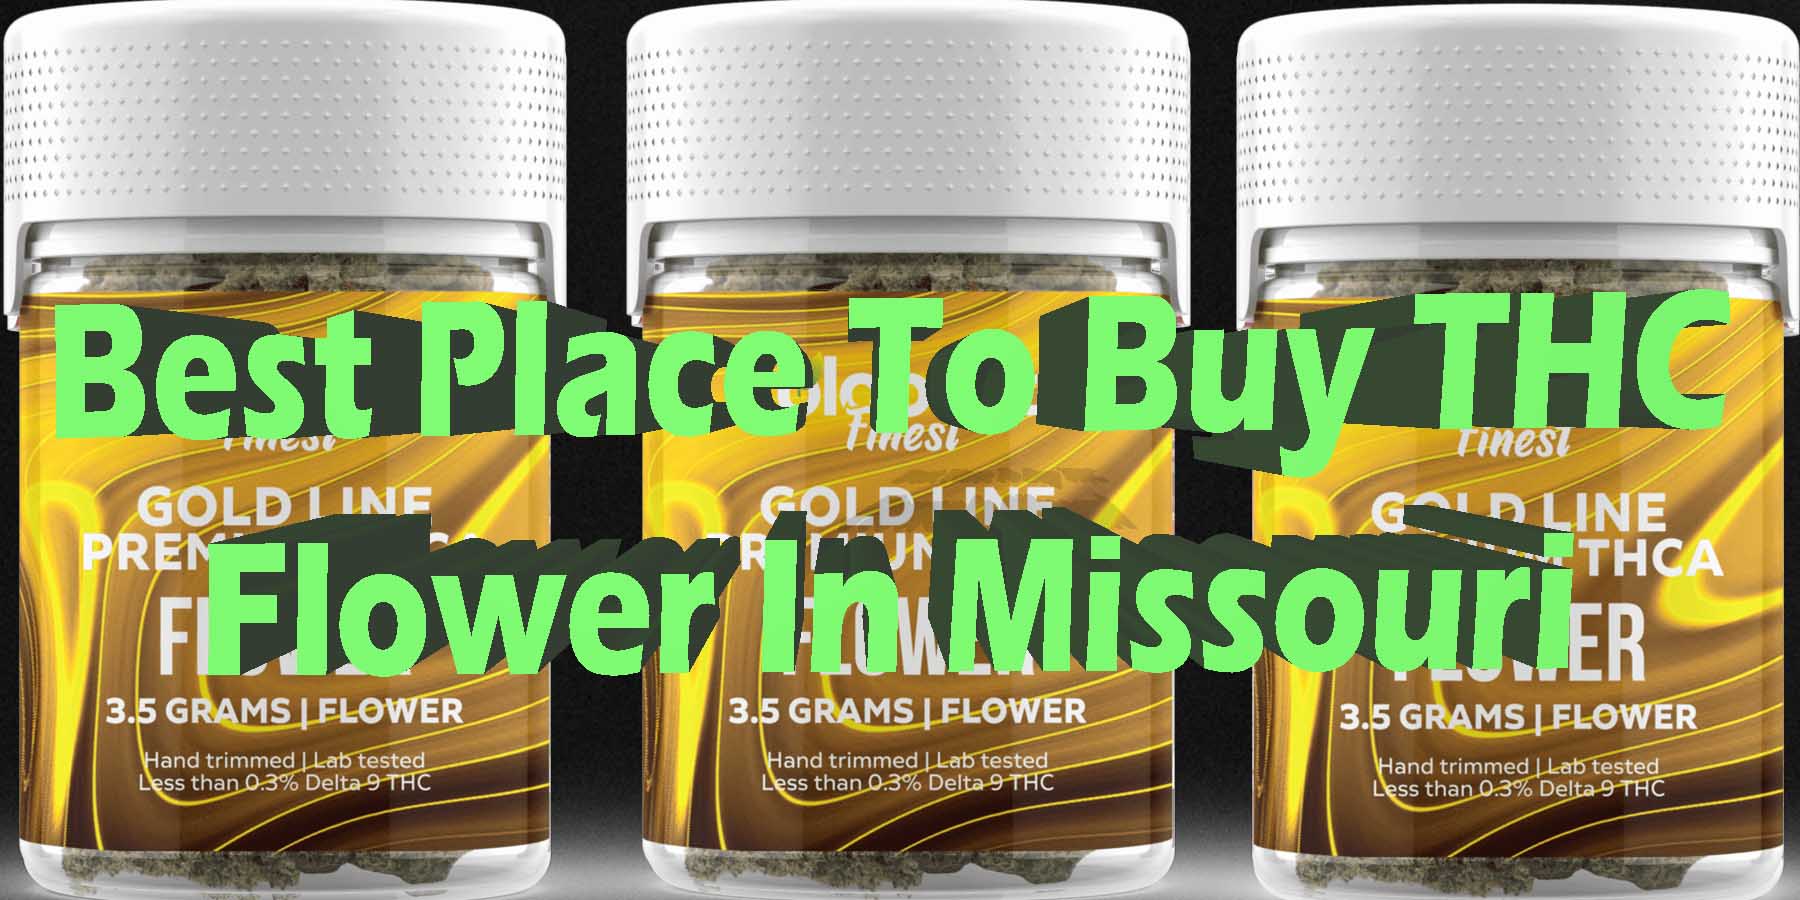 Best Place To Buy THC Flower in Missouri BestPlace LowestPrice Coupon Discount For Smoking Best High Smoke Shop Online Near Me StrongestBrand Binoid